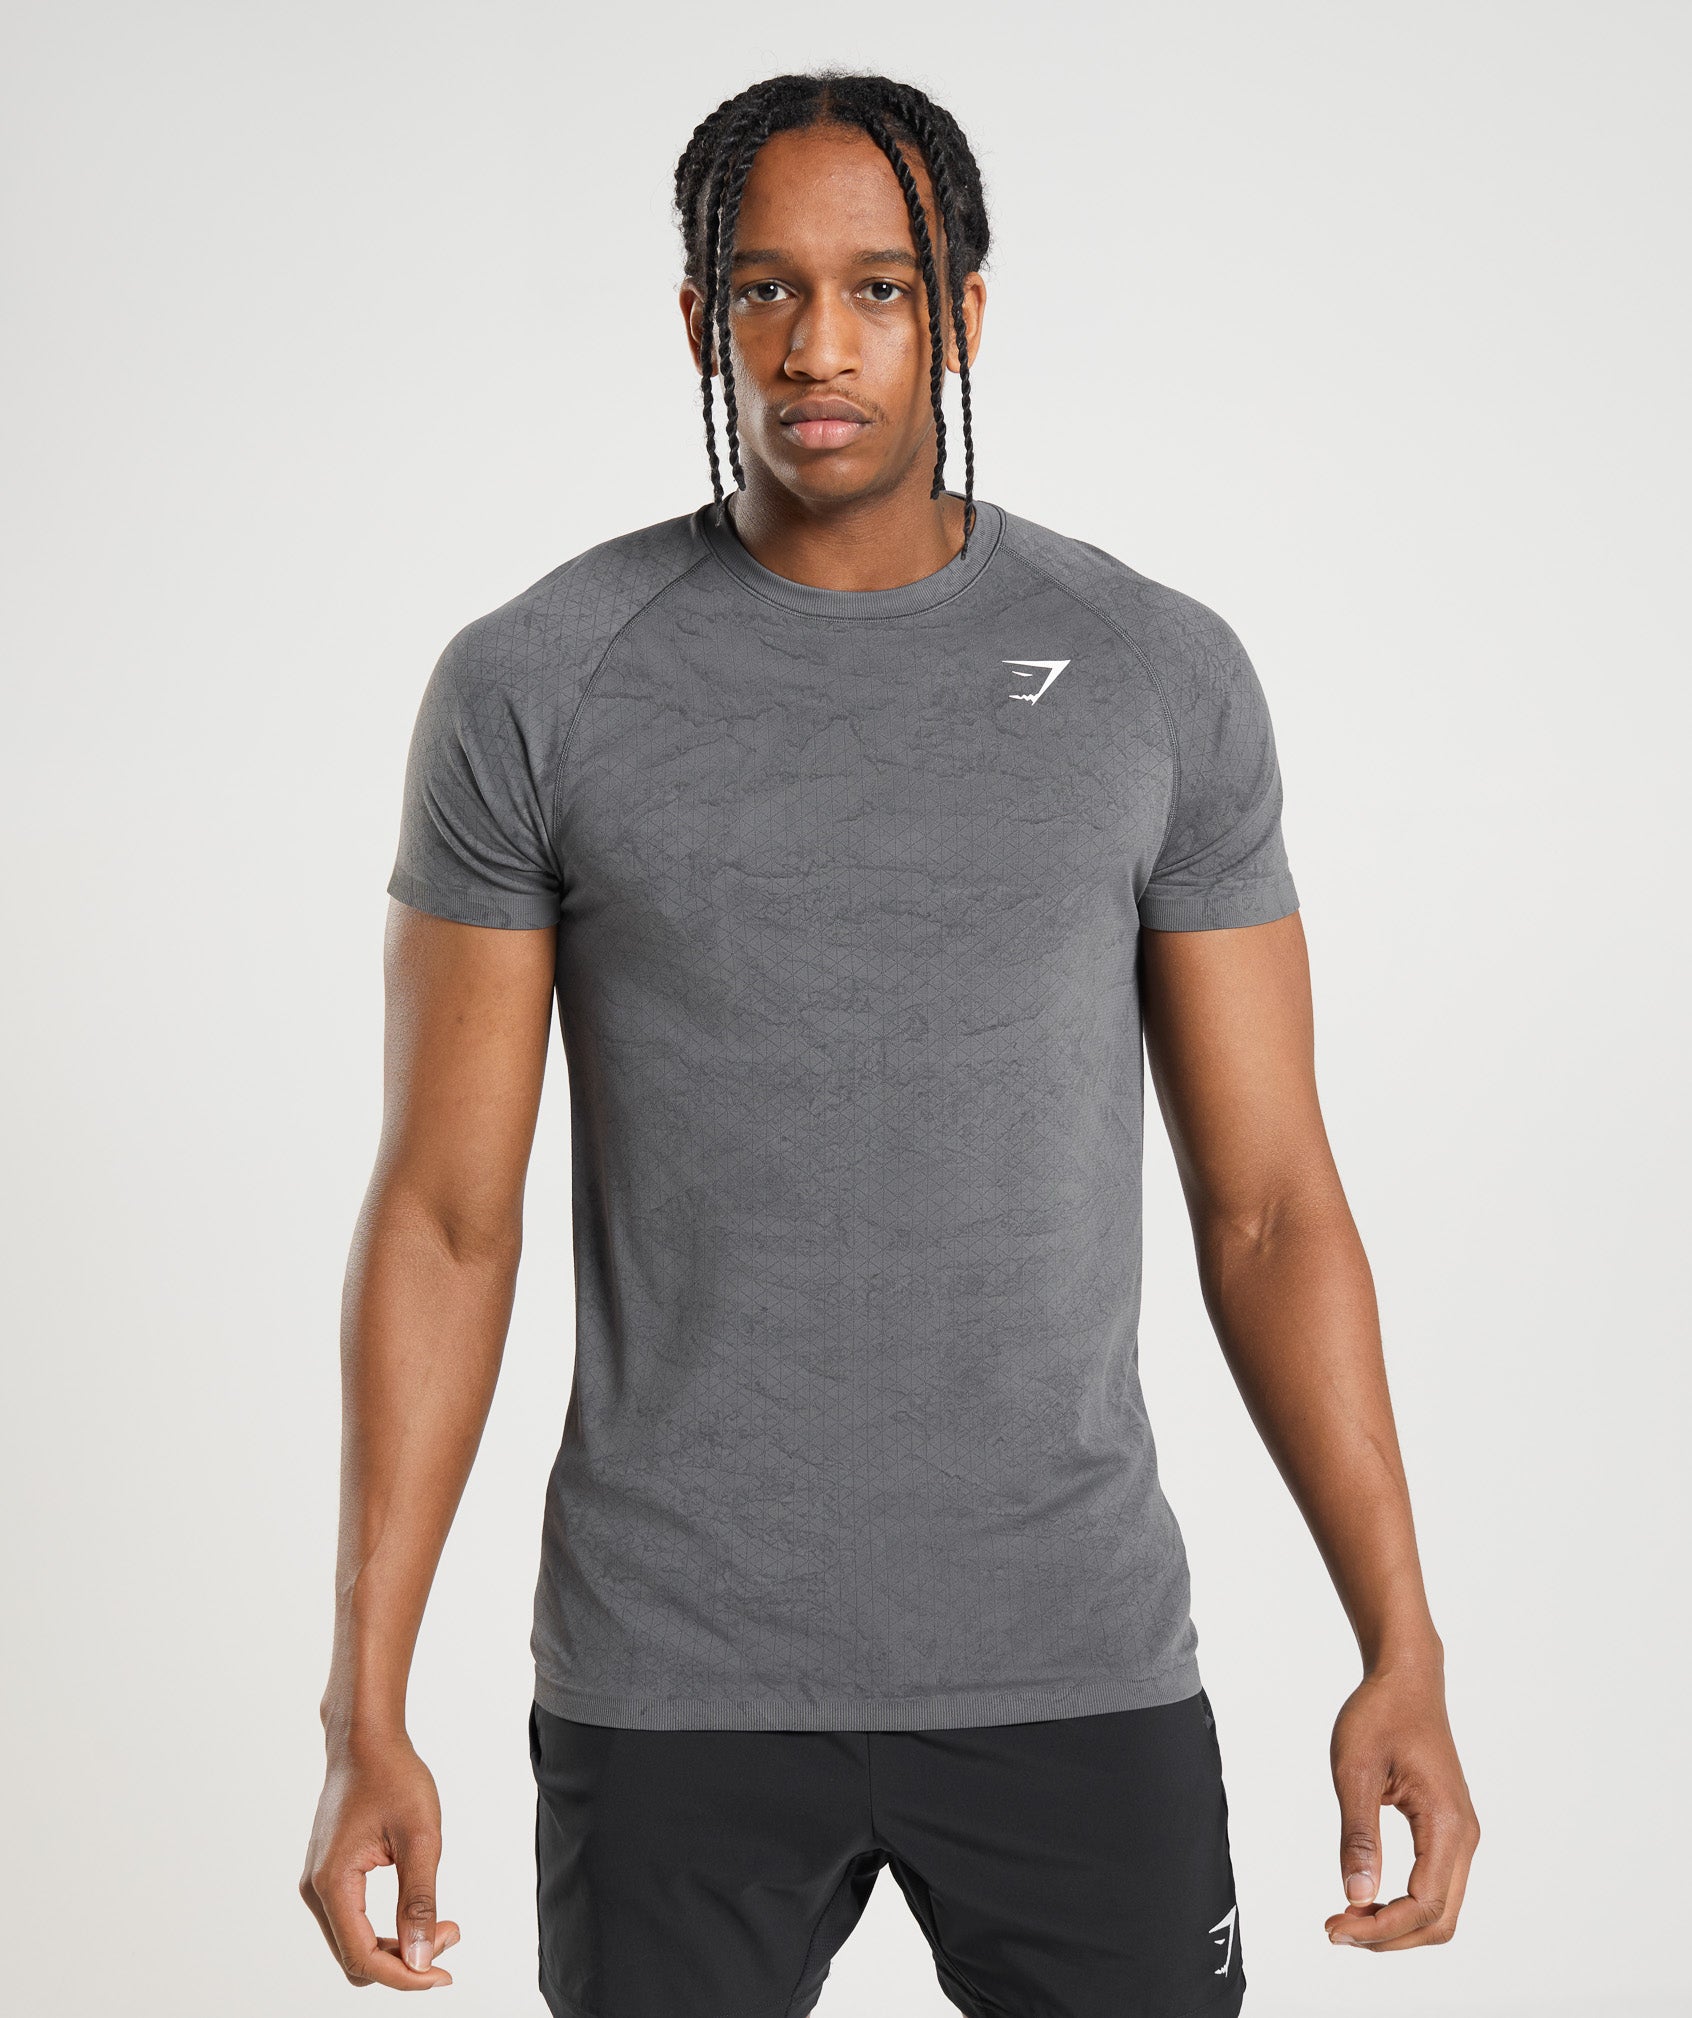 Geo Seamless T-Shirt in Charcoal Grey/Black - view 1